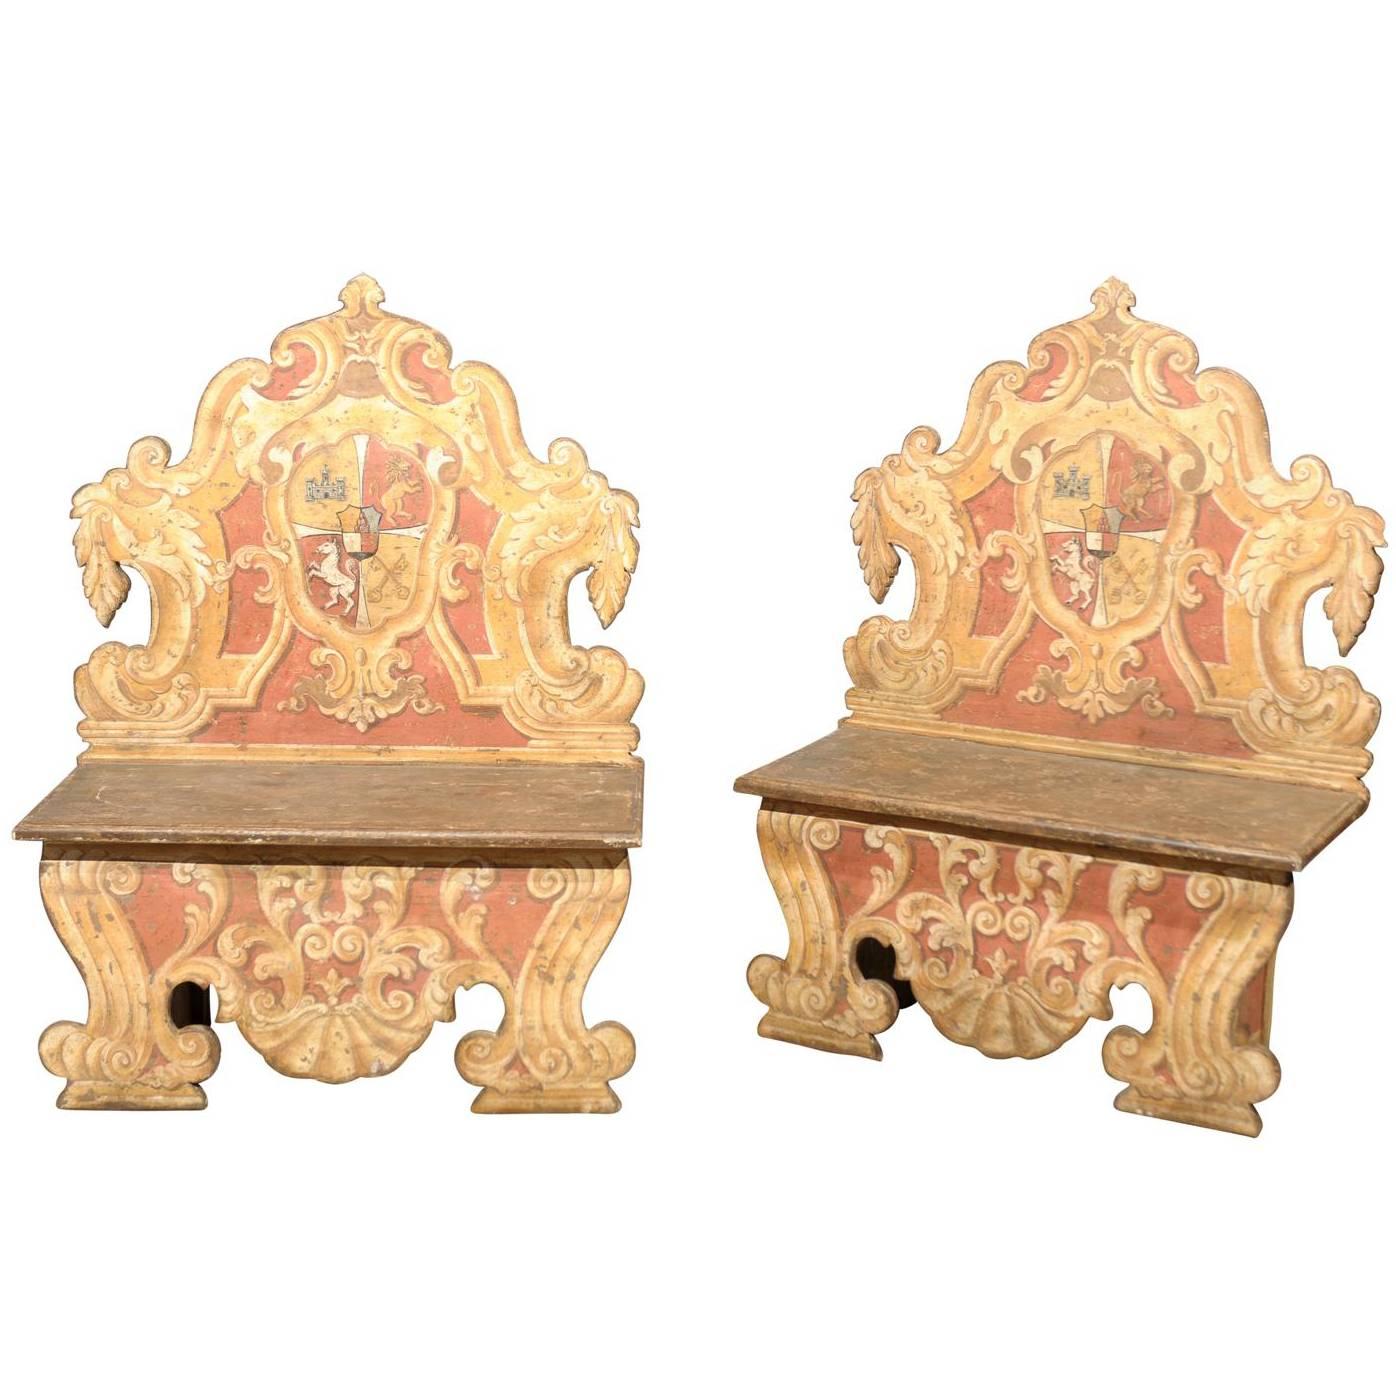 Pair of 19th Century Italian Painted Benches with Crests, Tuscany